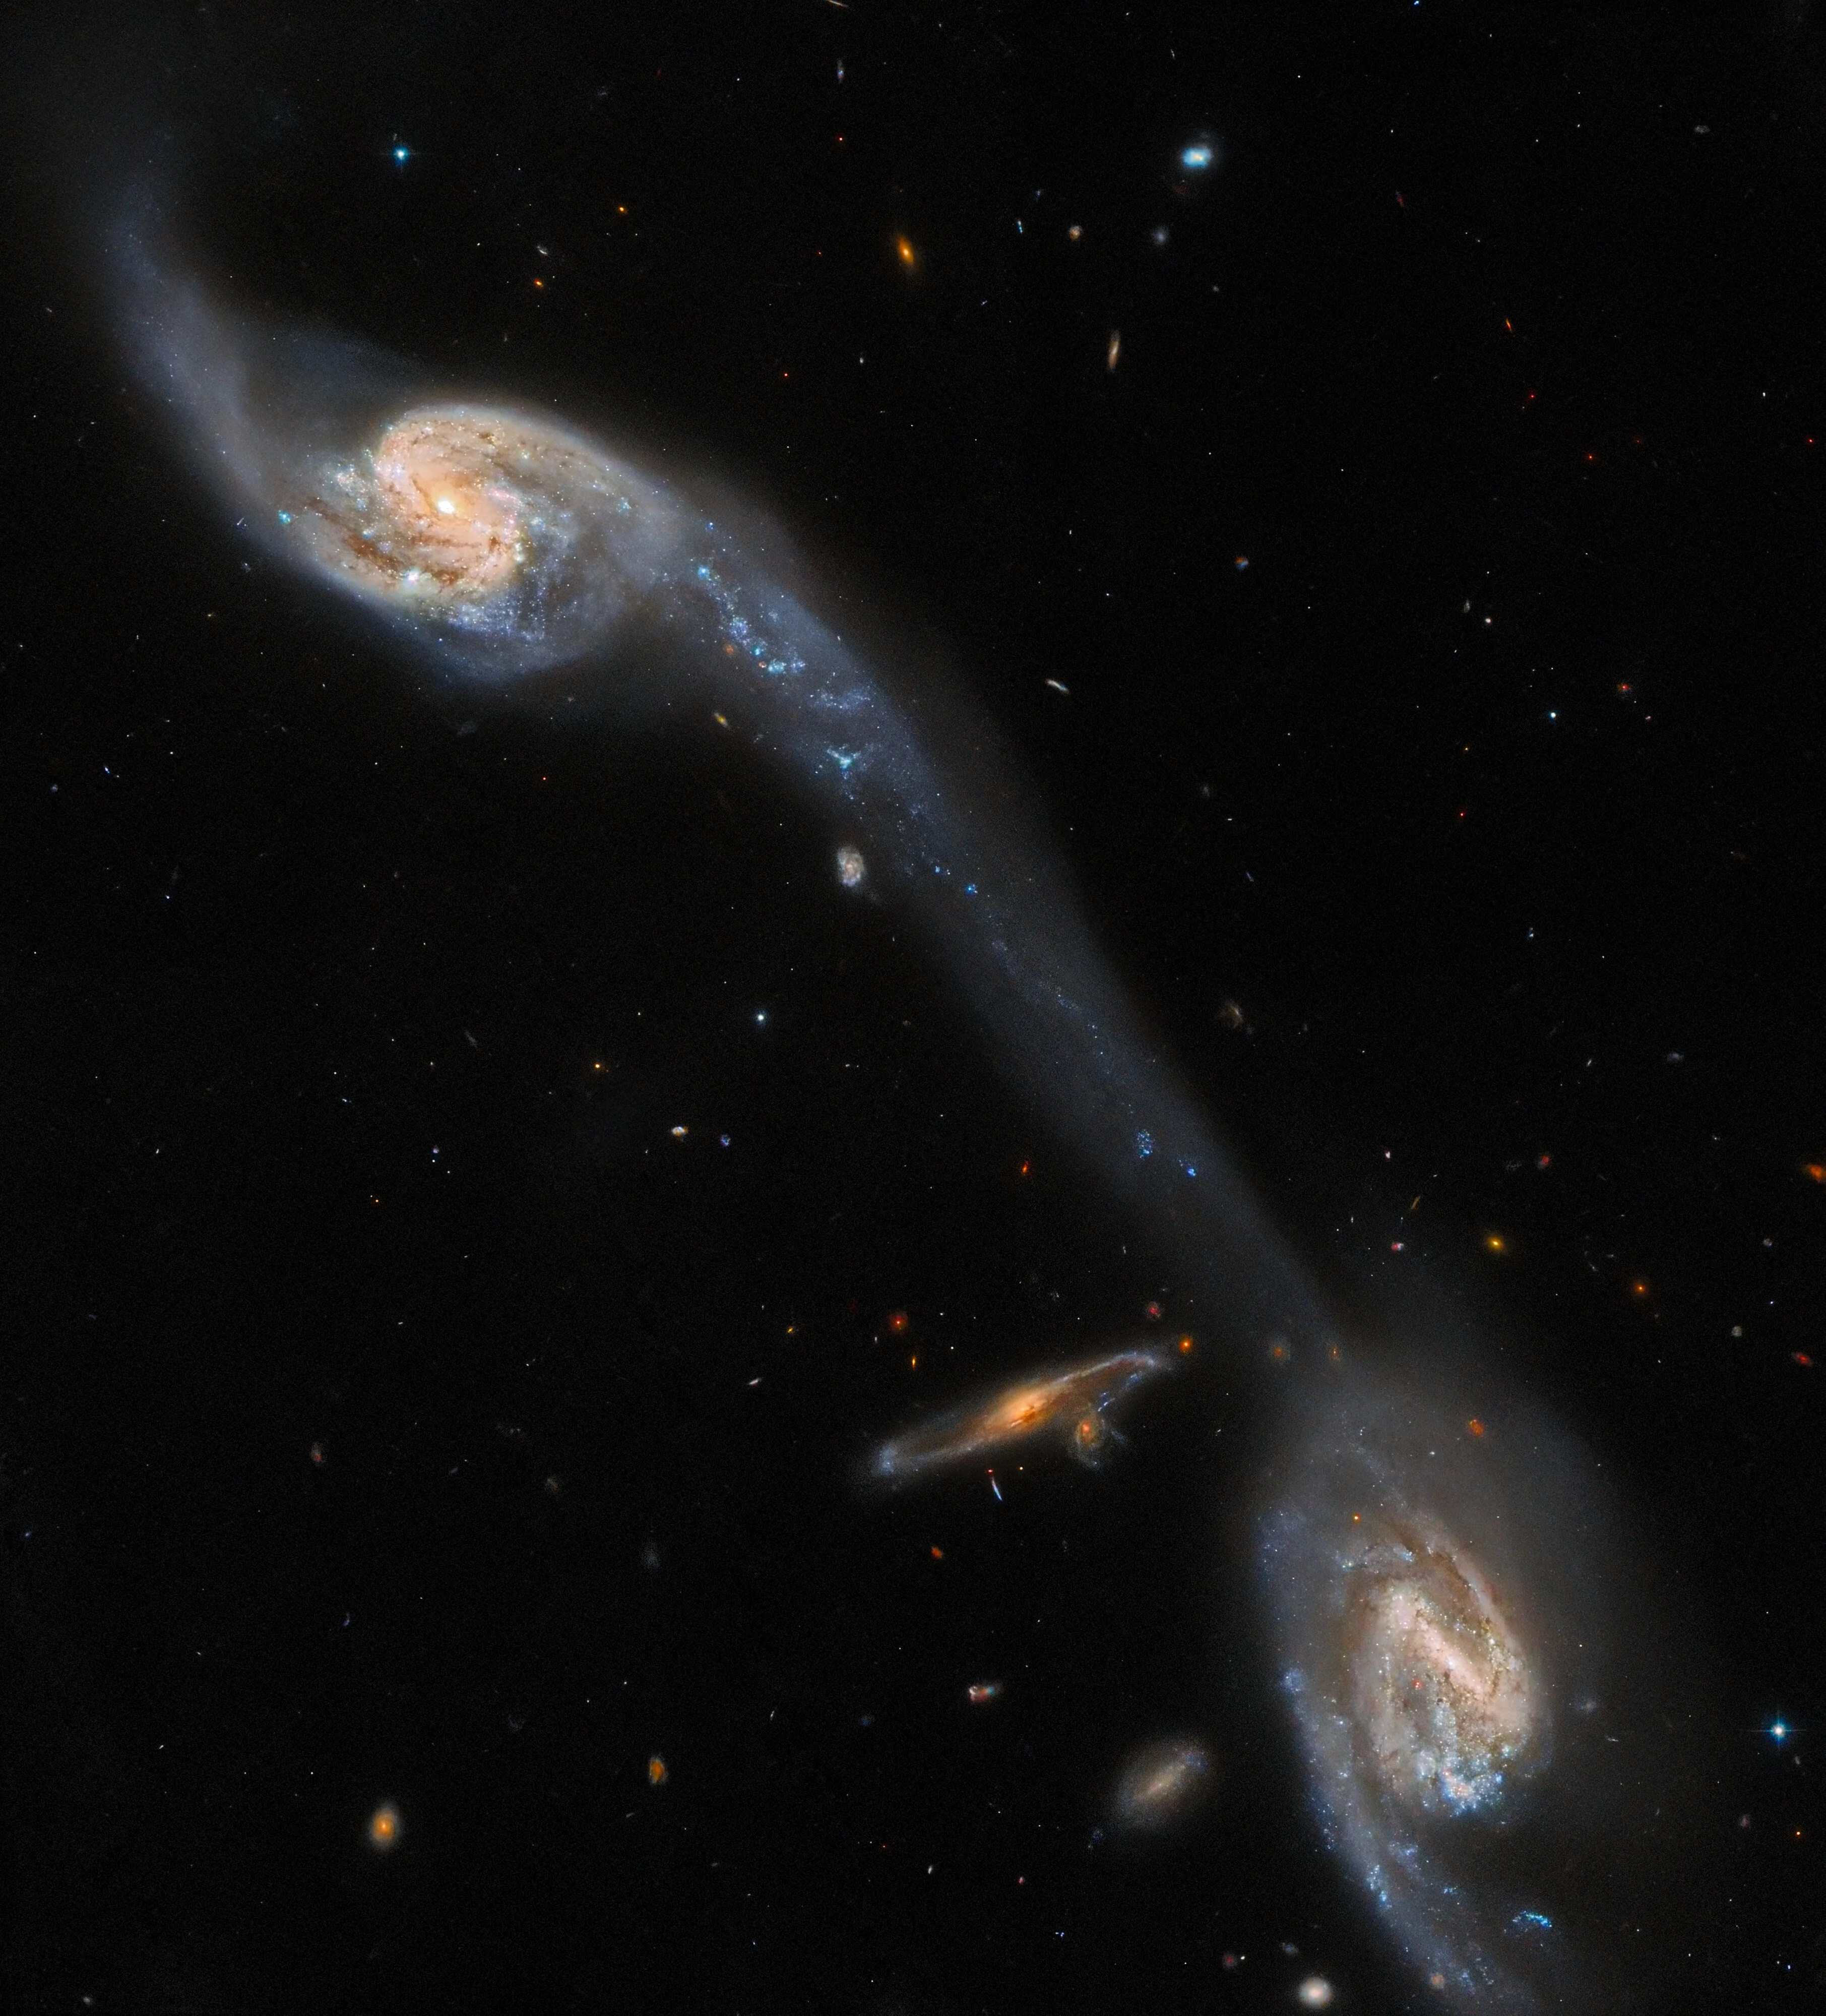 Two face-on spiral galaxies at upper-left and lower-right corners. a long, faint, pale-blue streak joins them, crossing the field diagonally. a small, orange, edge-on spiral galaxy at left of the lower galaxy.